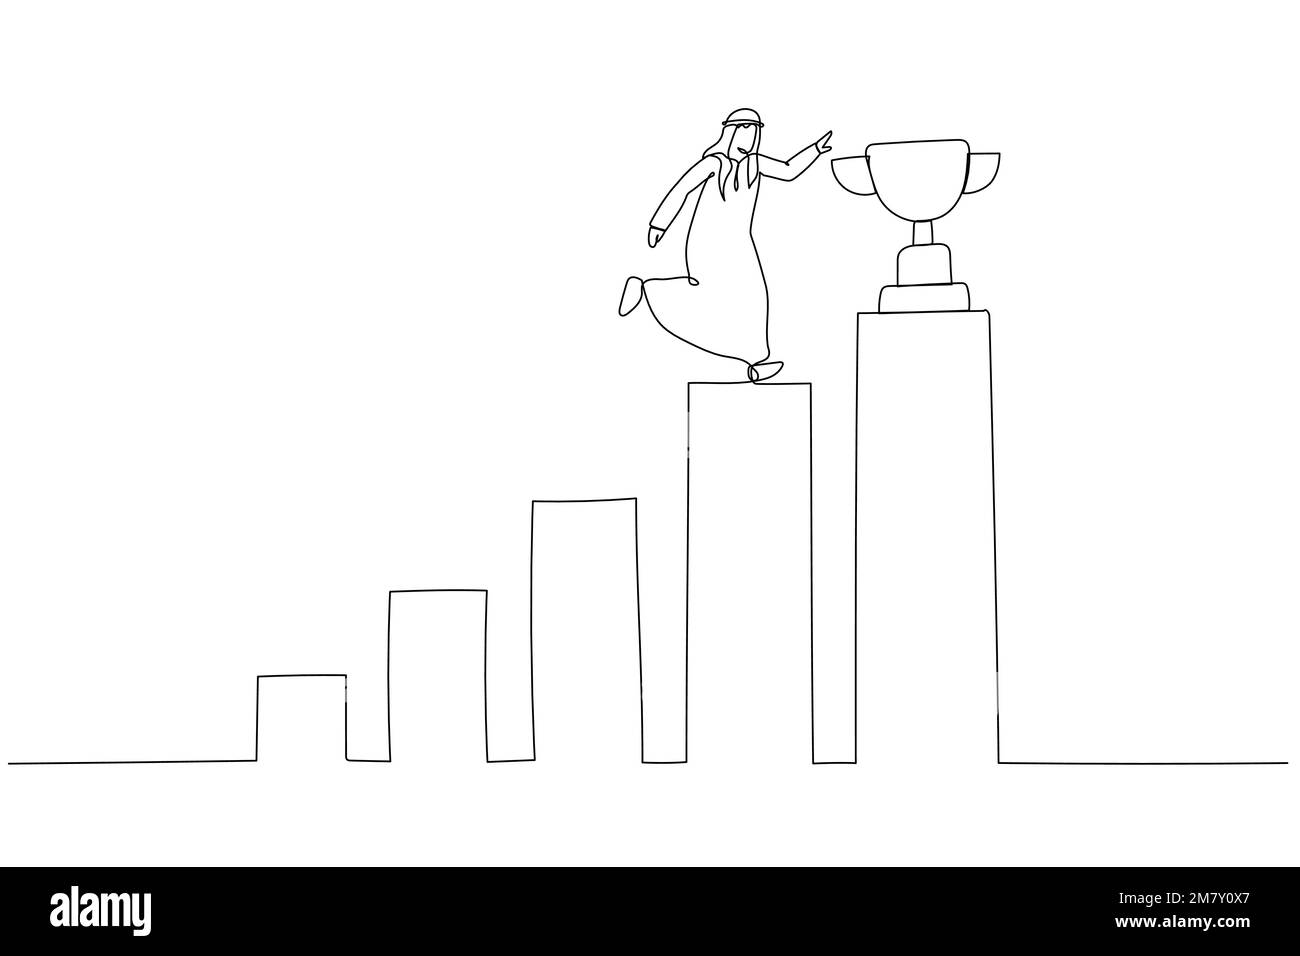 Cartoon of winning arab businessman step up growing bar graph to win the trophy success concept. Single continuous line art style design Stock Vector